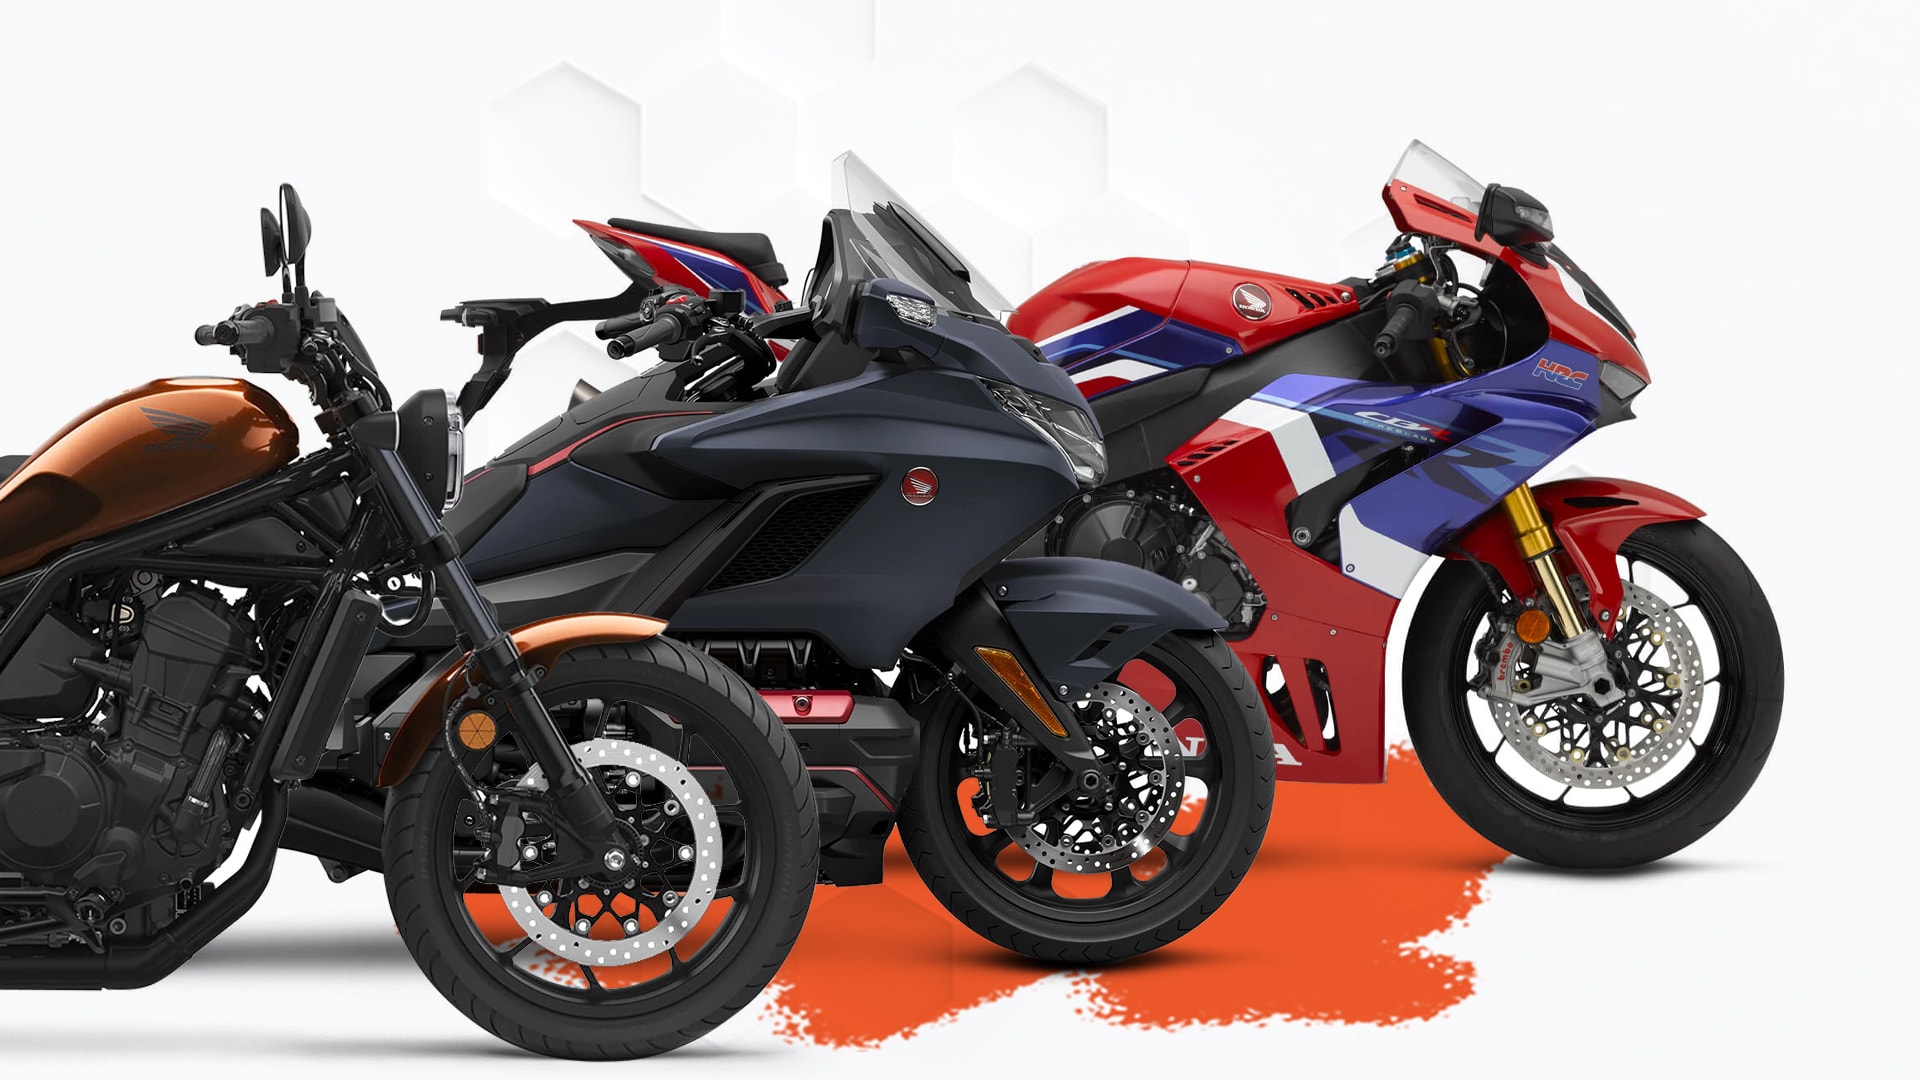 The 2022 Honda Motorcycle Lineup + Our Take On Each Model - webBikeWorld